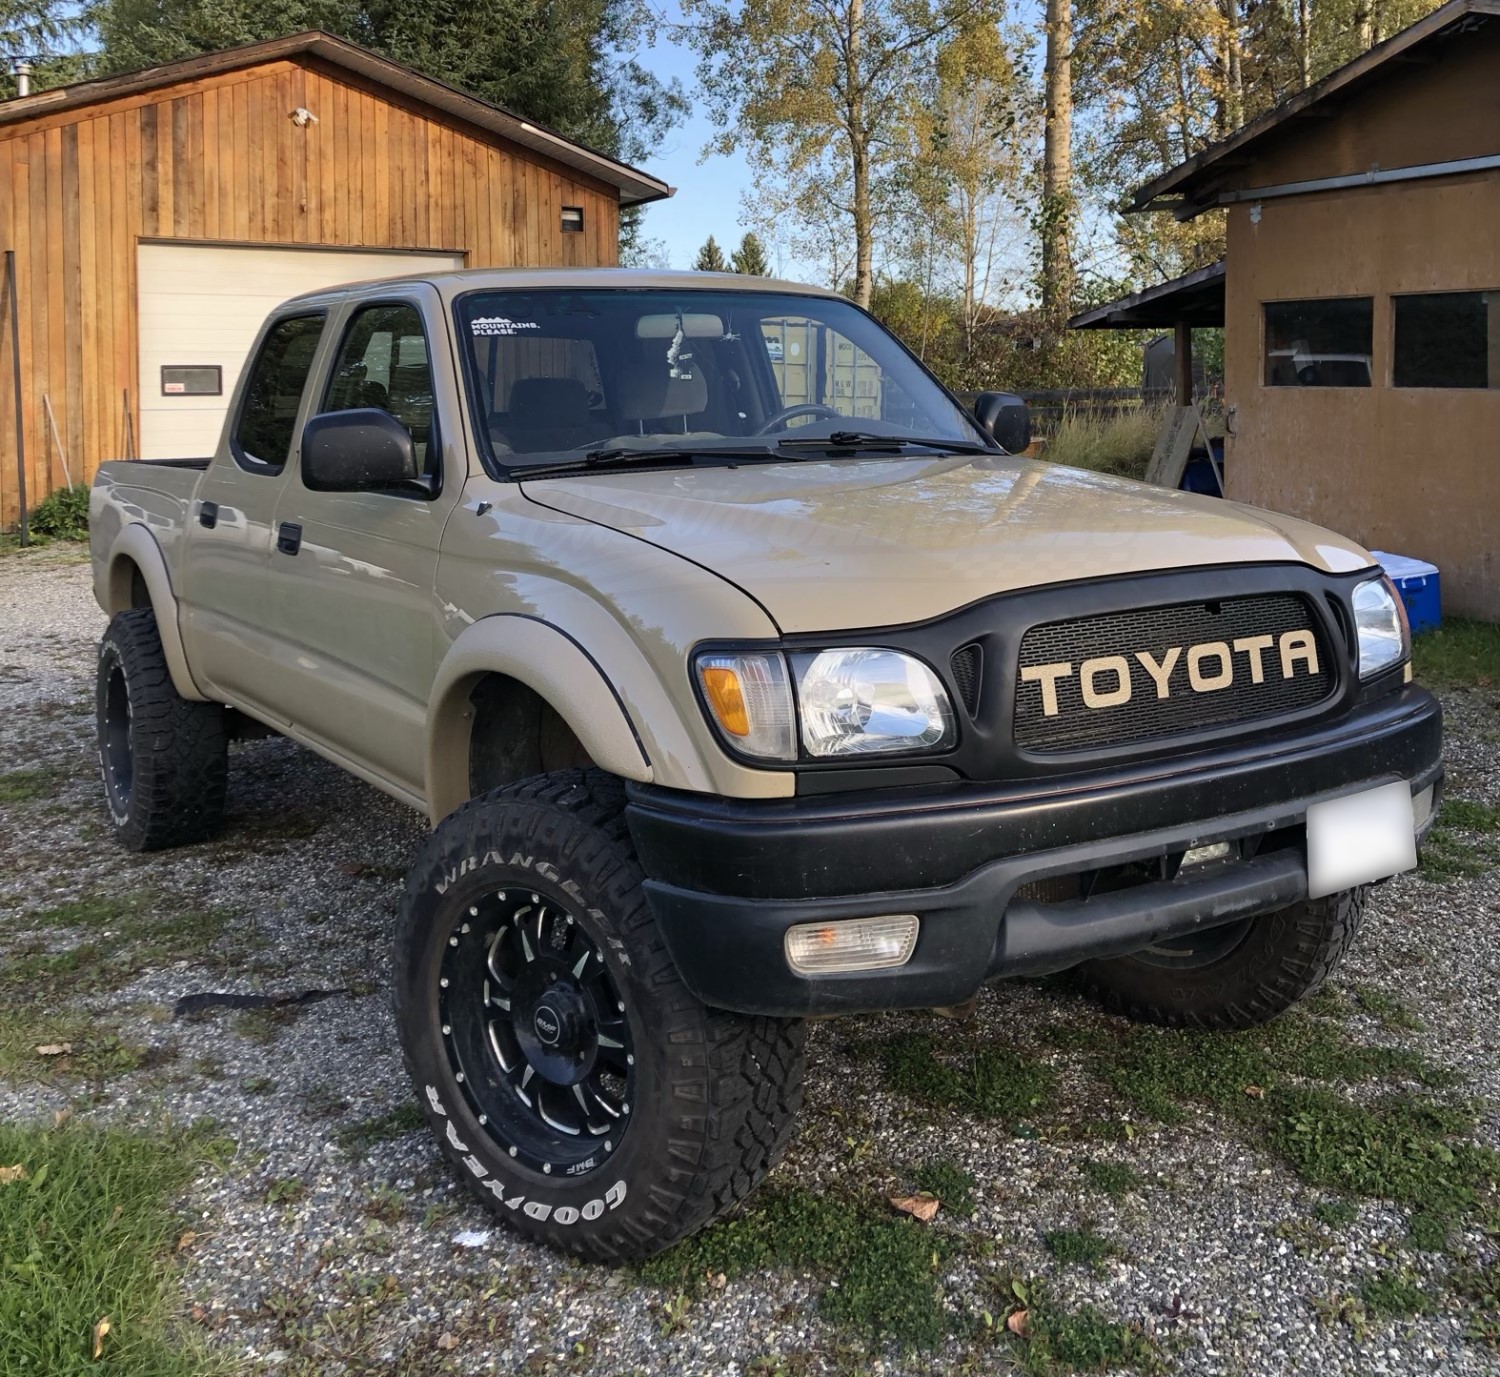 Personalized Mesh Grille Upgrade for Toyota Tacoma with Color-Matched Letters